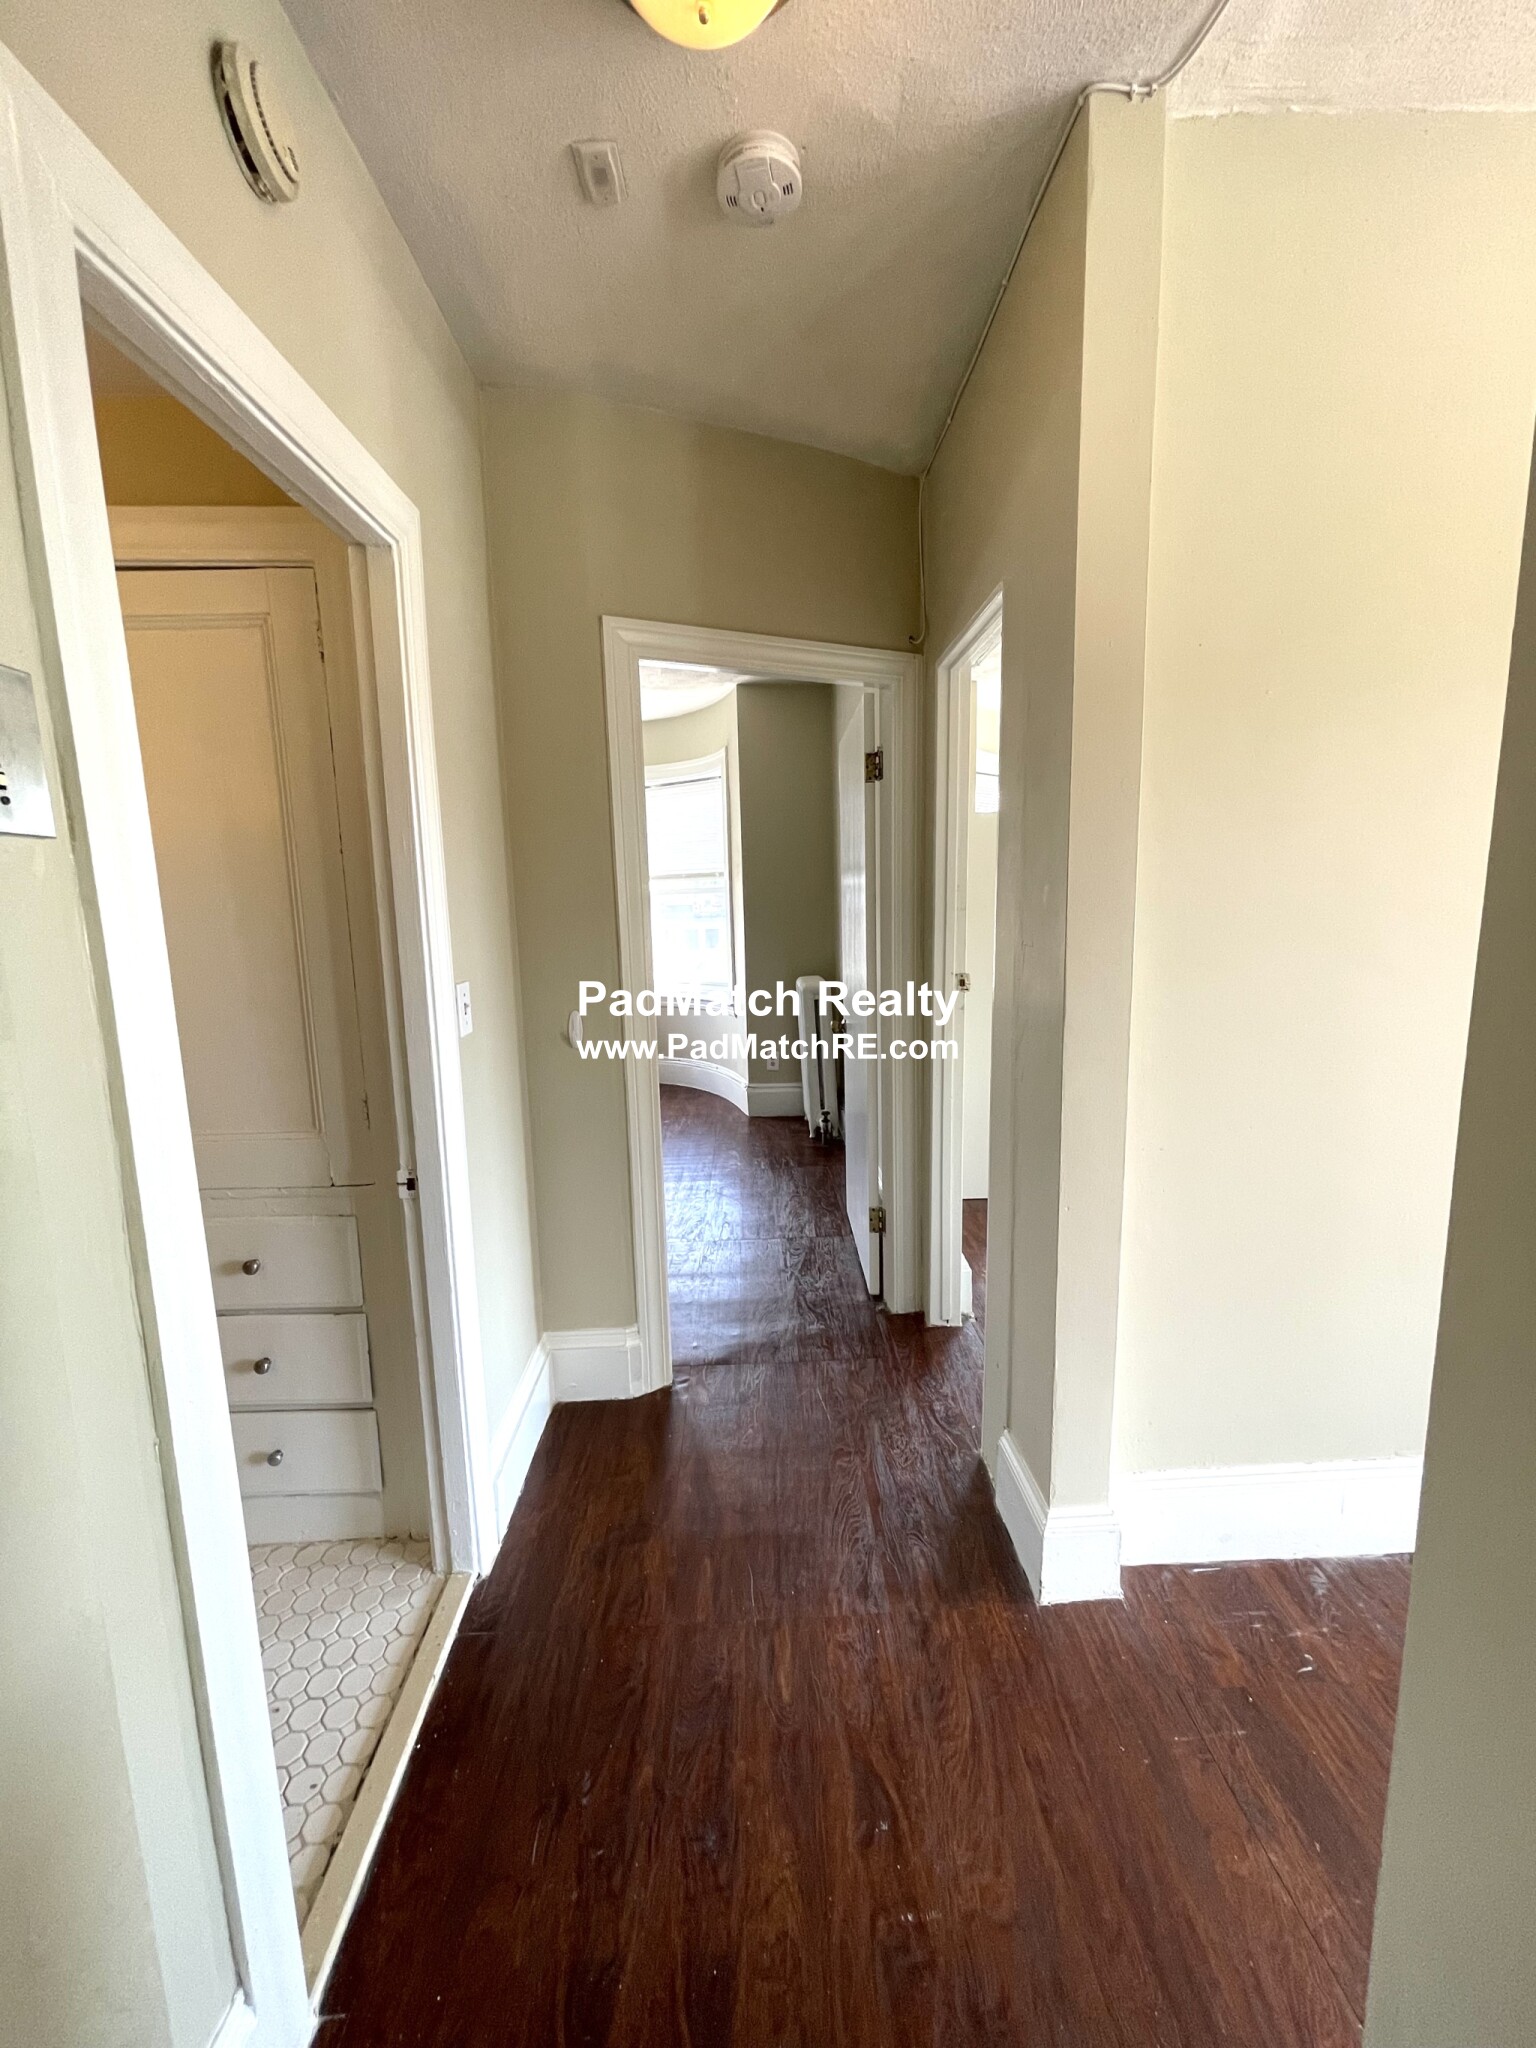 2 Beds, 1 Bath apartment in Boston, Fenway for $3,100